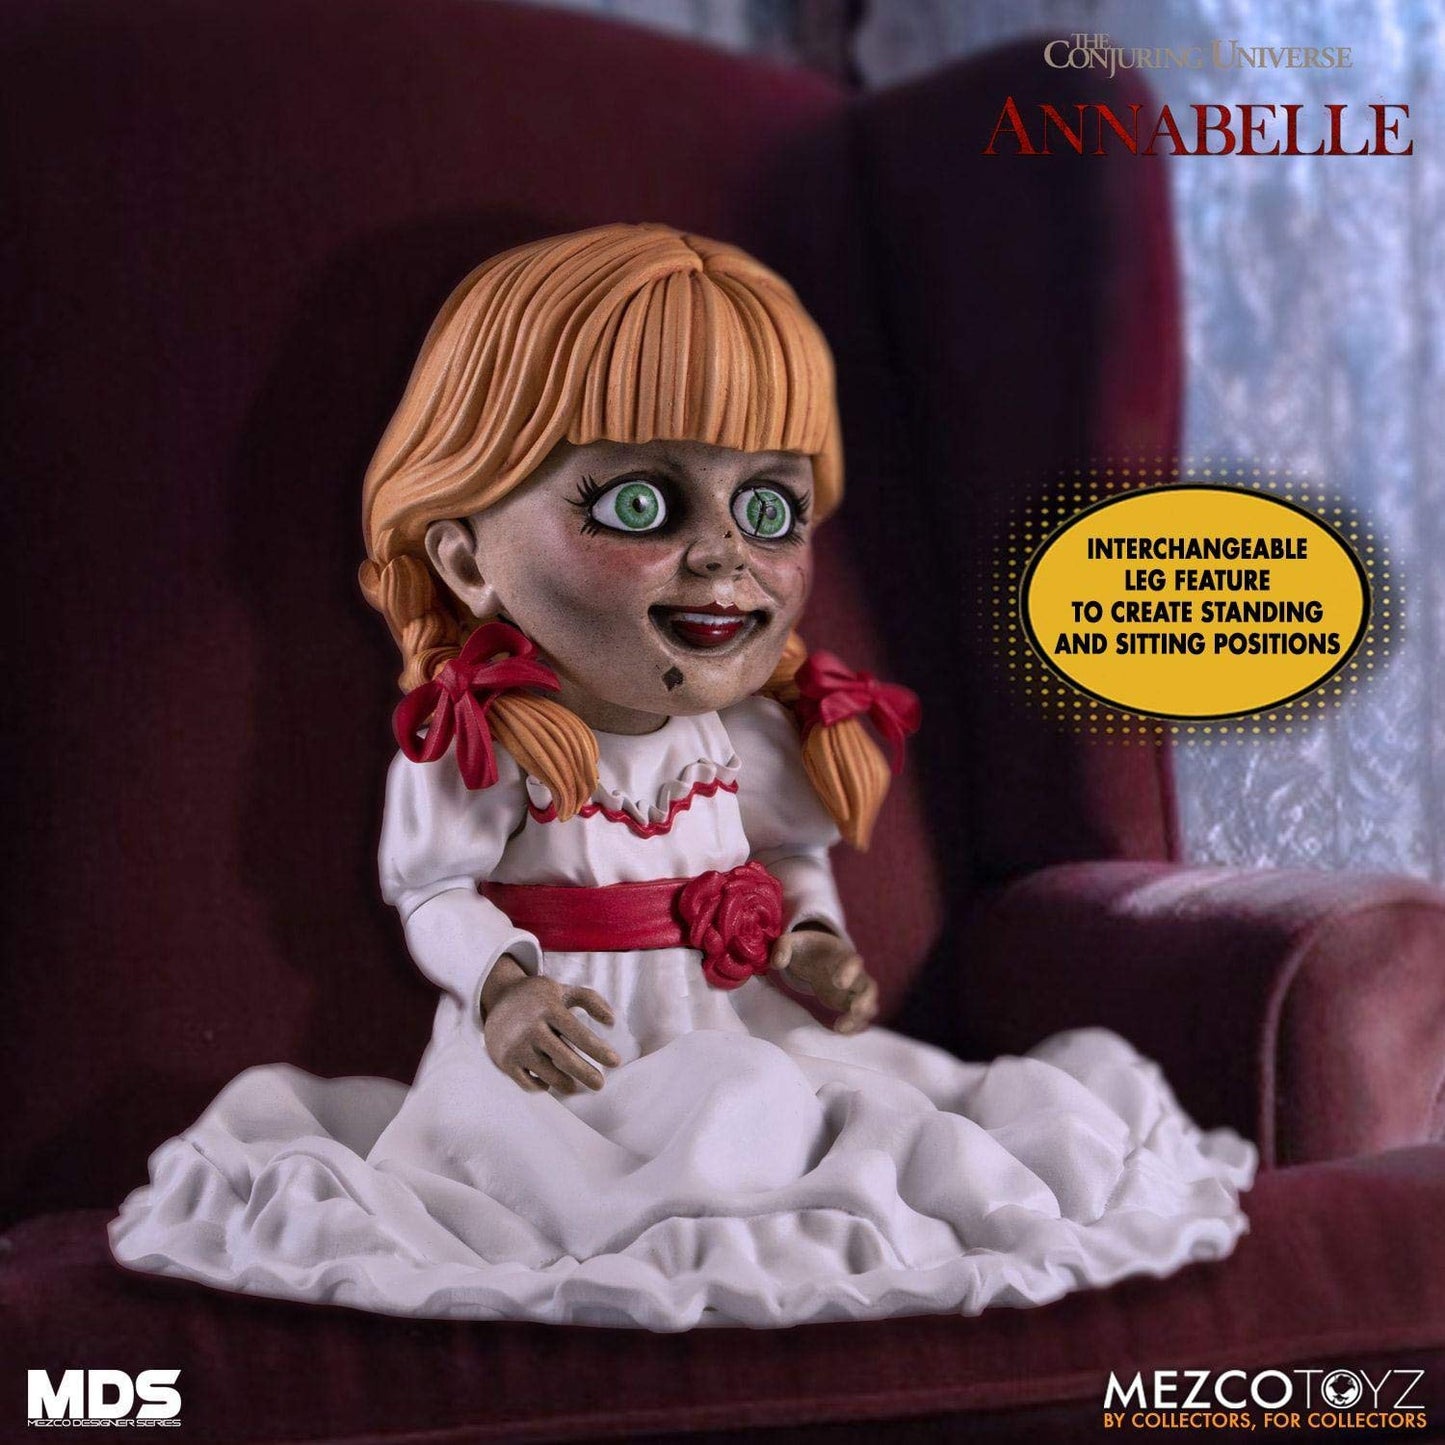 Annabelle 6" MDS Action Figure The Conjuring Universe